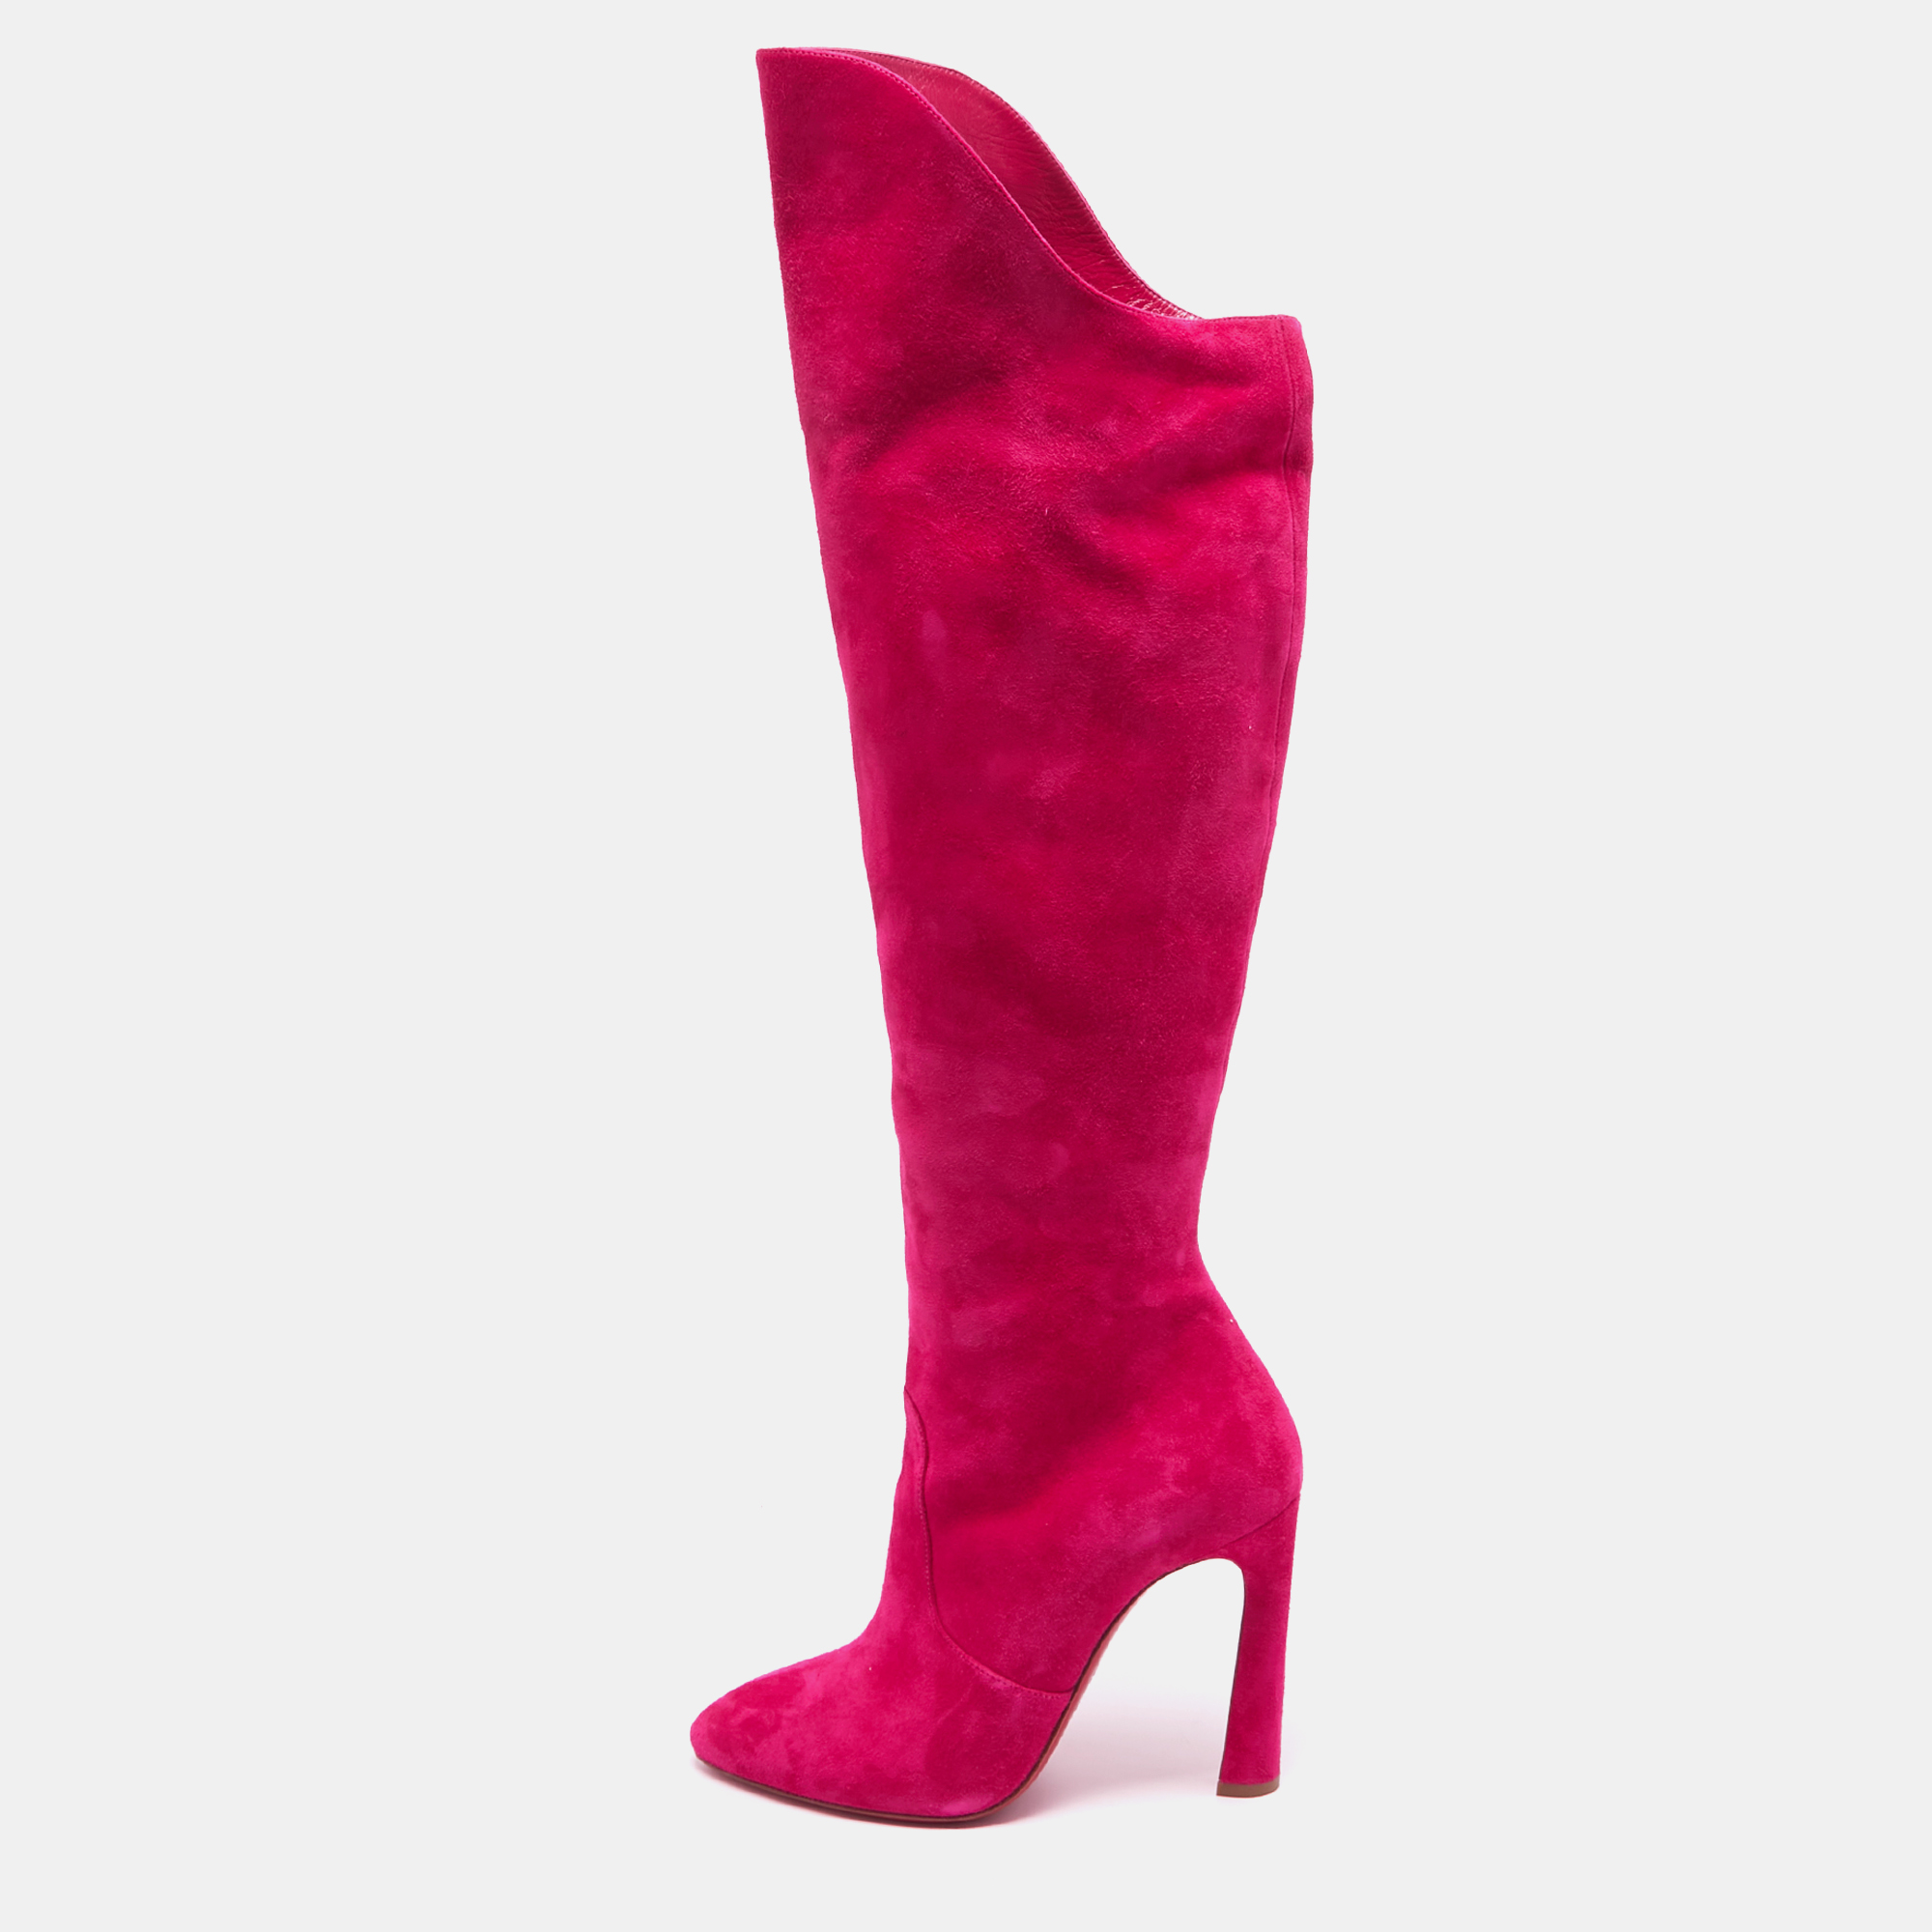 Christian louboutin pink suede knee length boots size 38